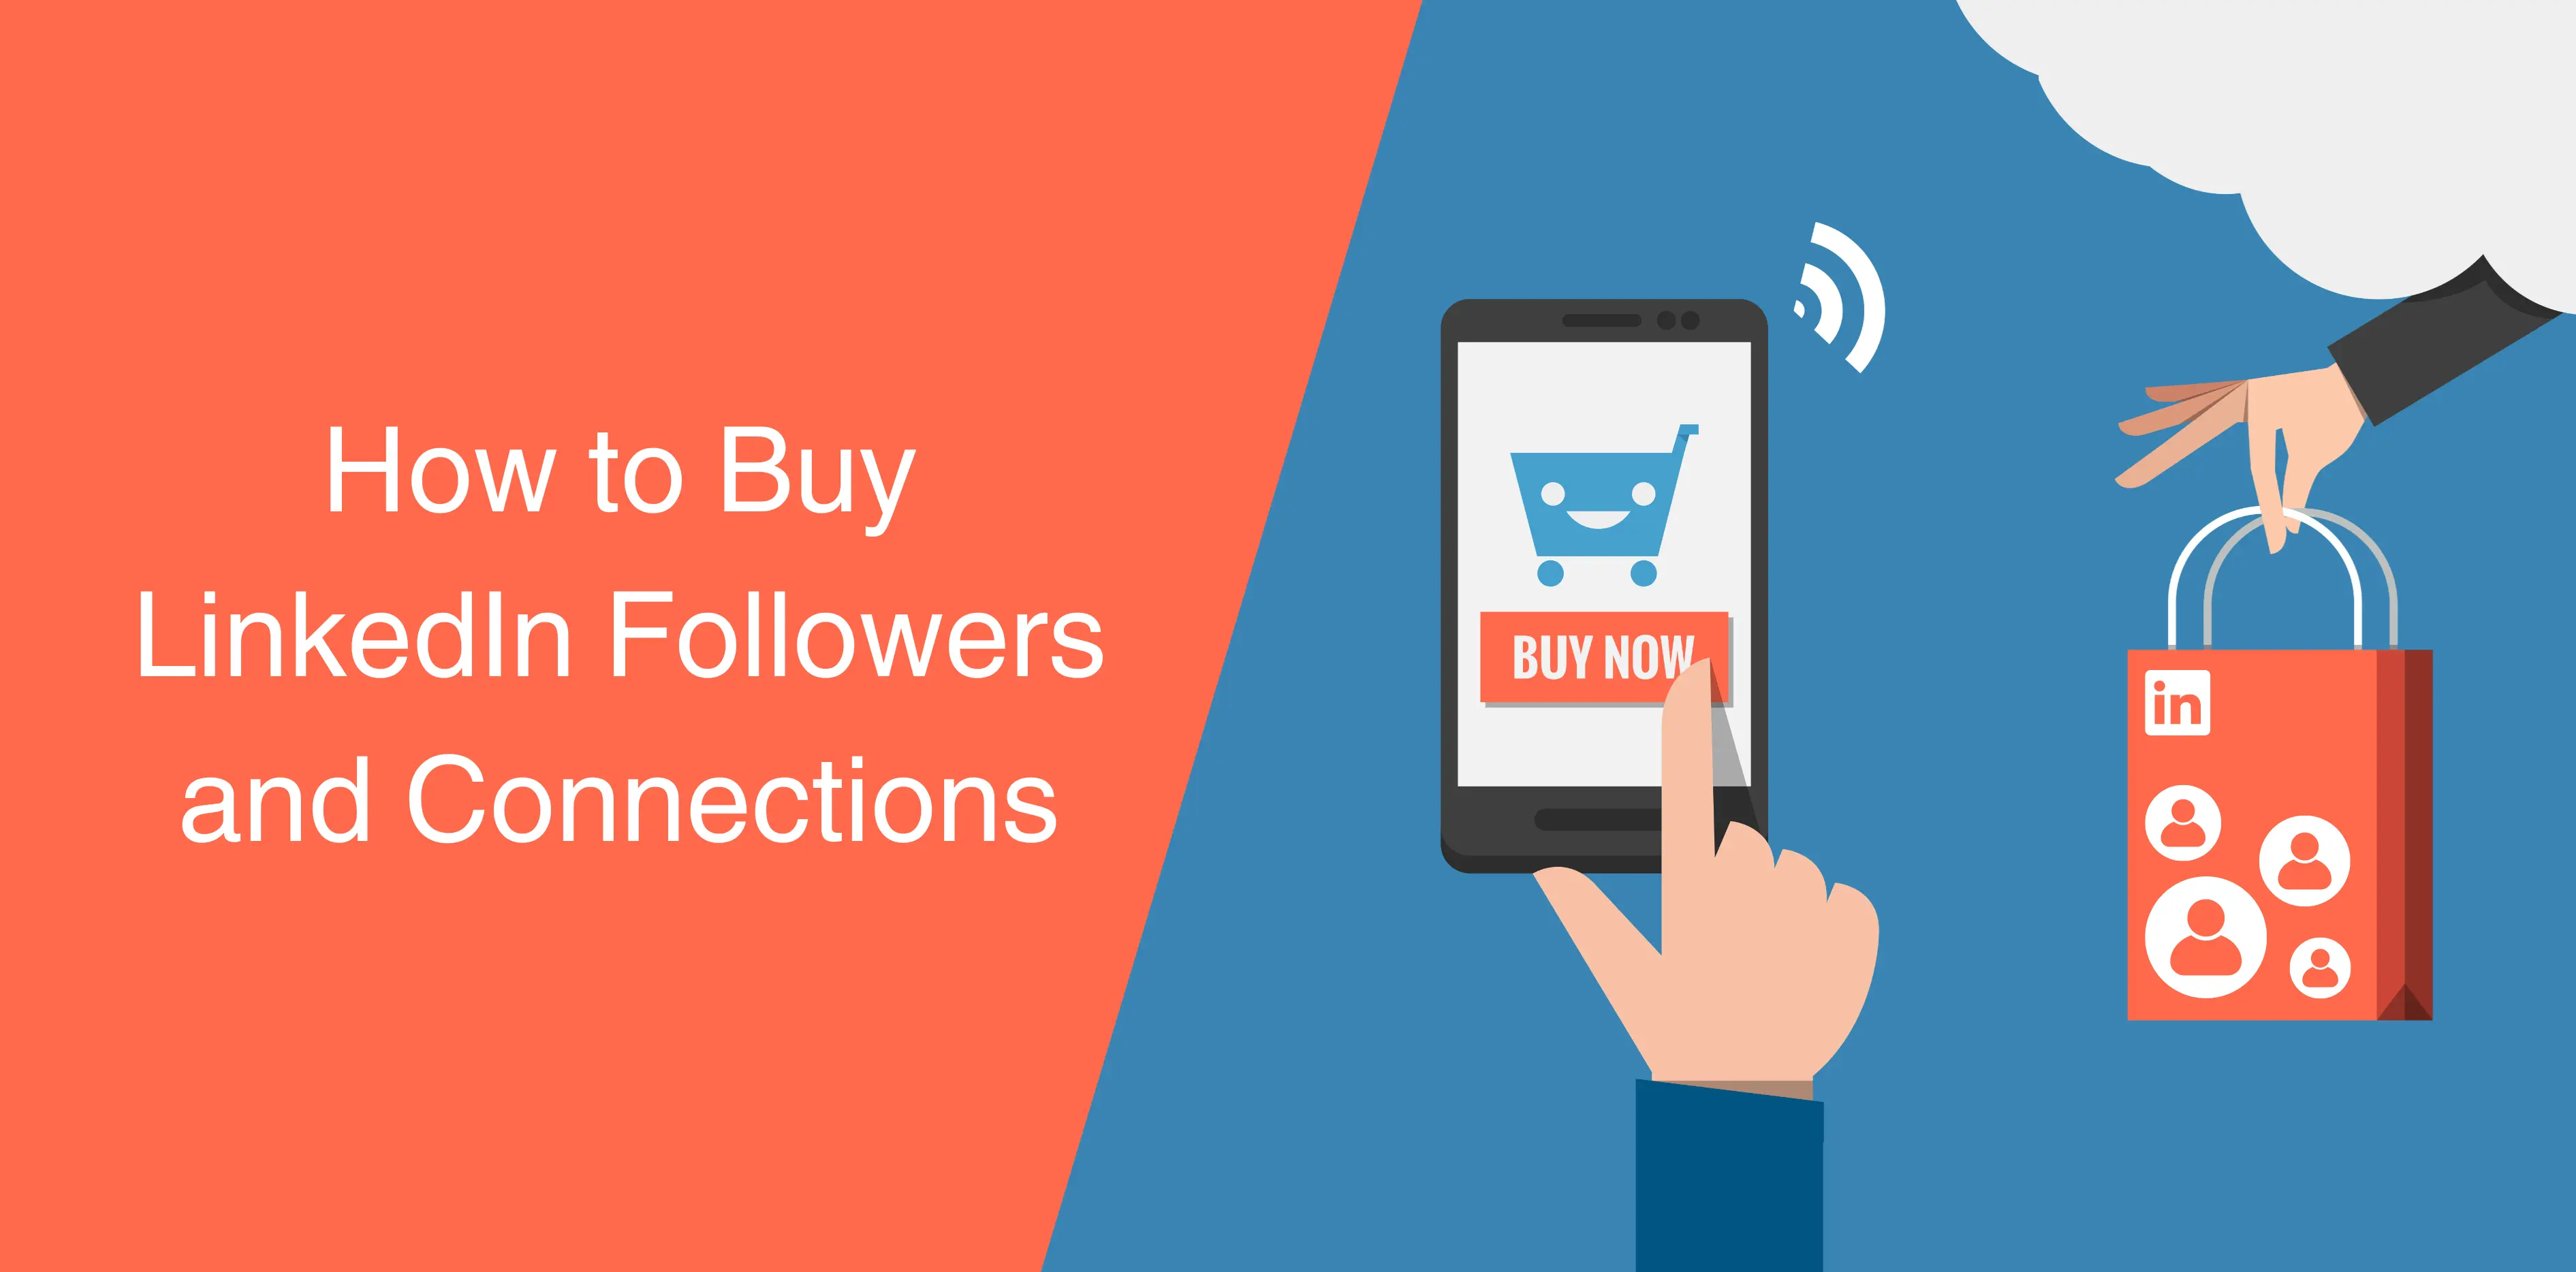 How to Buy LinkedIn Followers and Connections